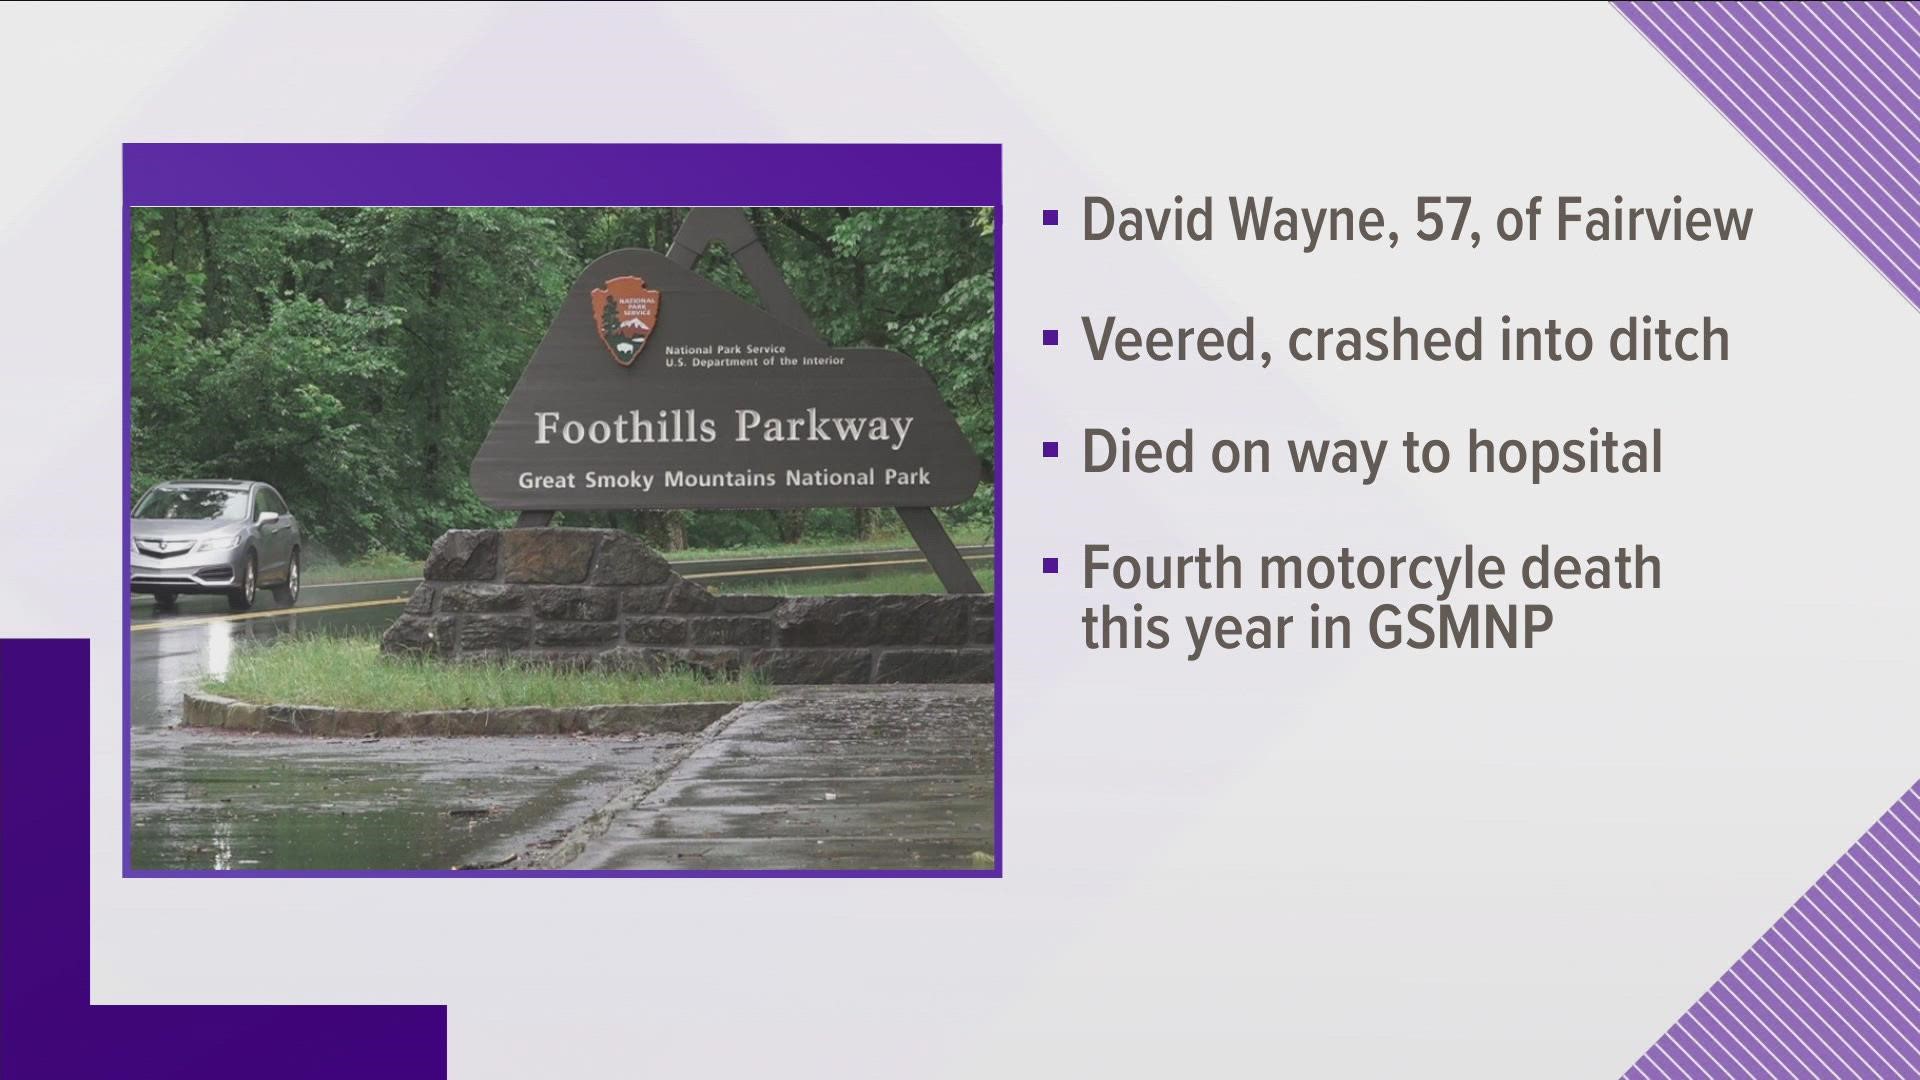 Rangers said that David Wayne, 57, from Fairview, crashed on Foothills Parkway between Walland and Wears Valley.